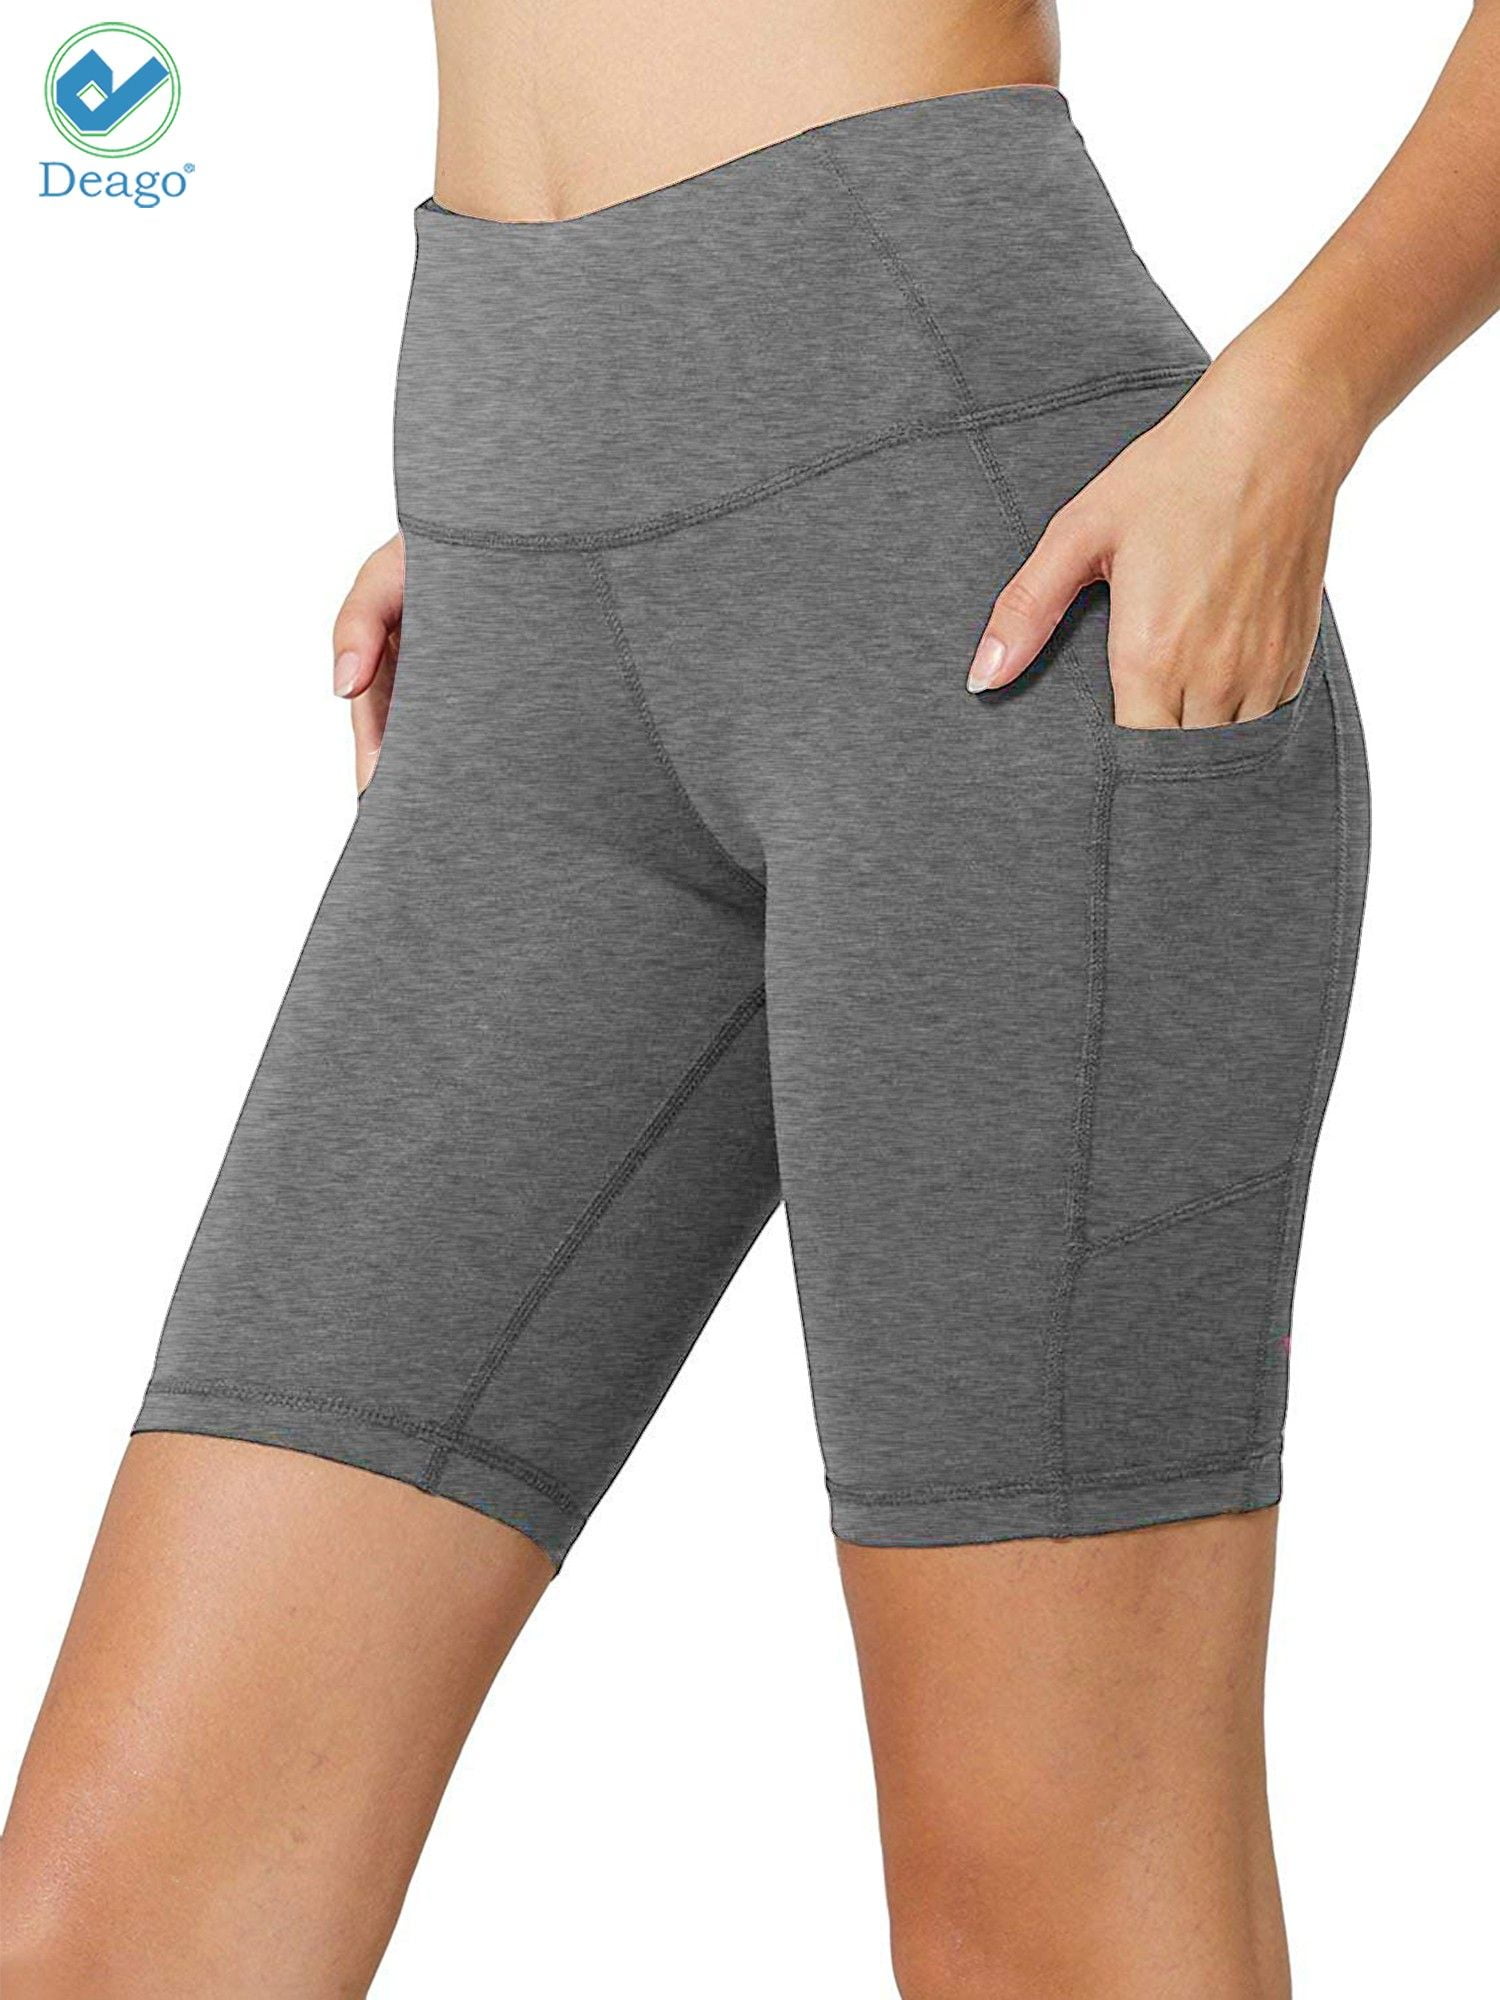 Tummy Control Stretchy Yoga Shorts for Workout Running High Waist Biker Shorts with Pockets for Women 